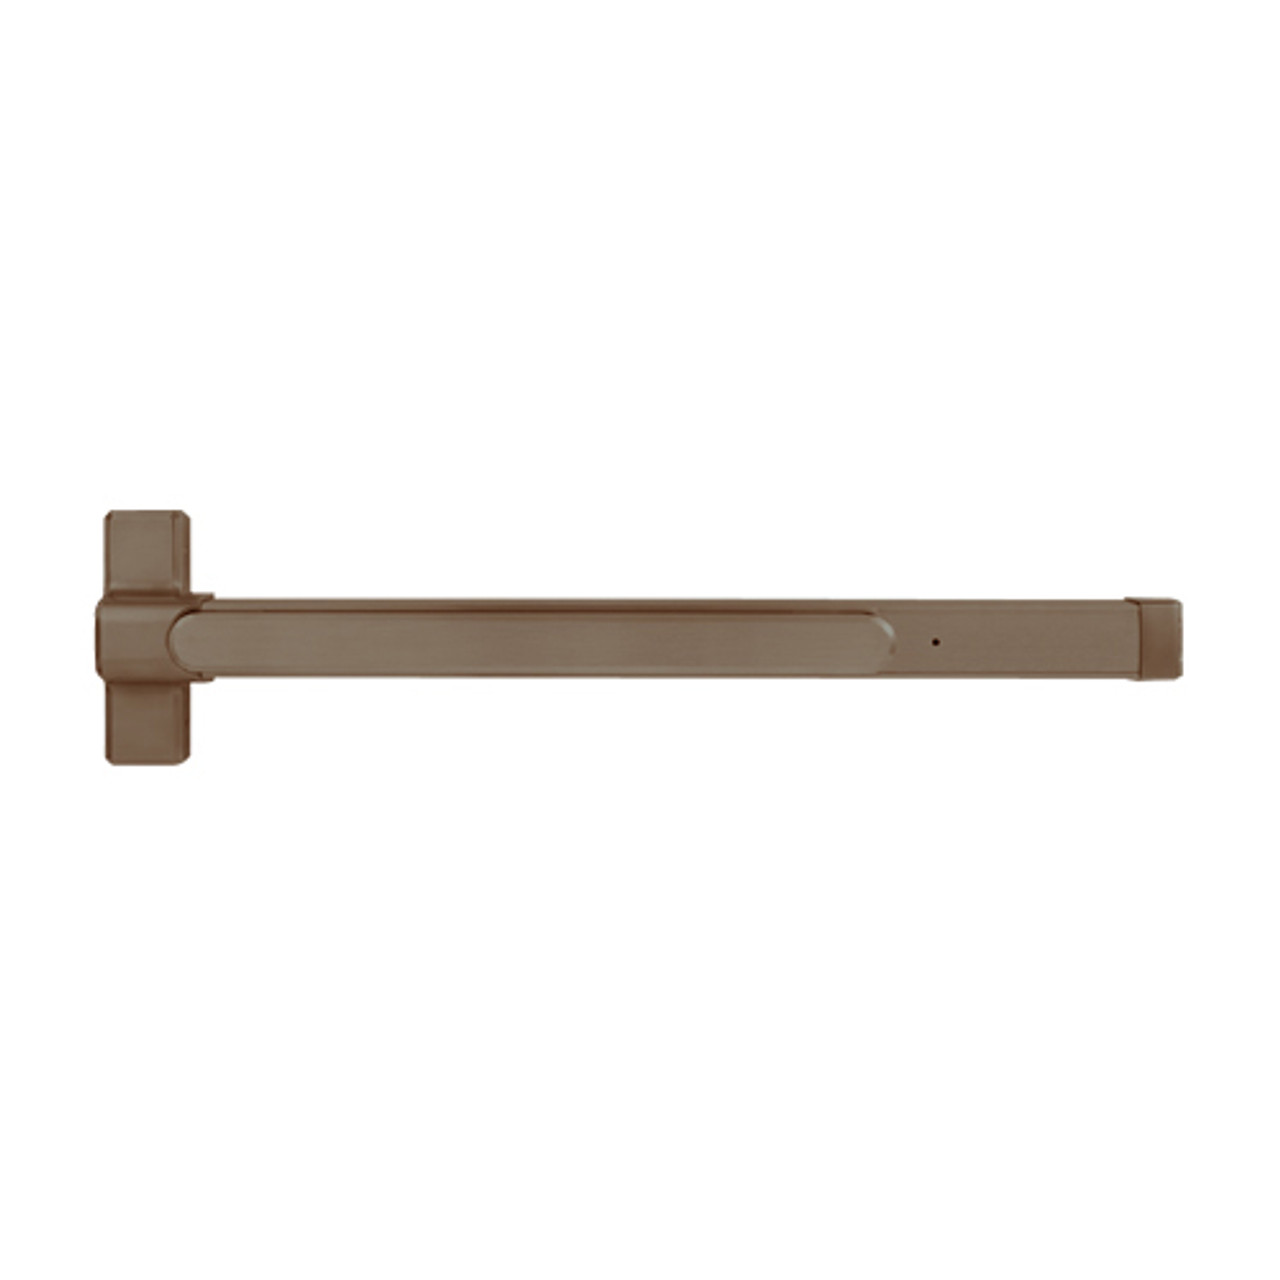 QED127ED-36-8-313AN Stanley QED100 Series Heavy Duty Concealed Vertical Rod Hex Dog Exit Device in Anodized Duranodic Bronze Finish